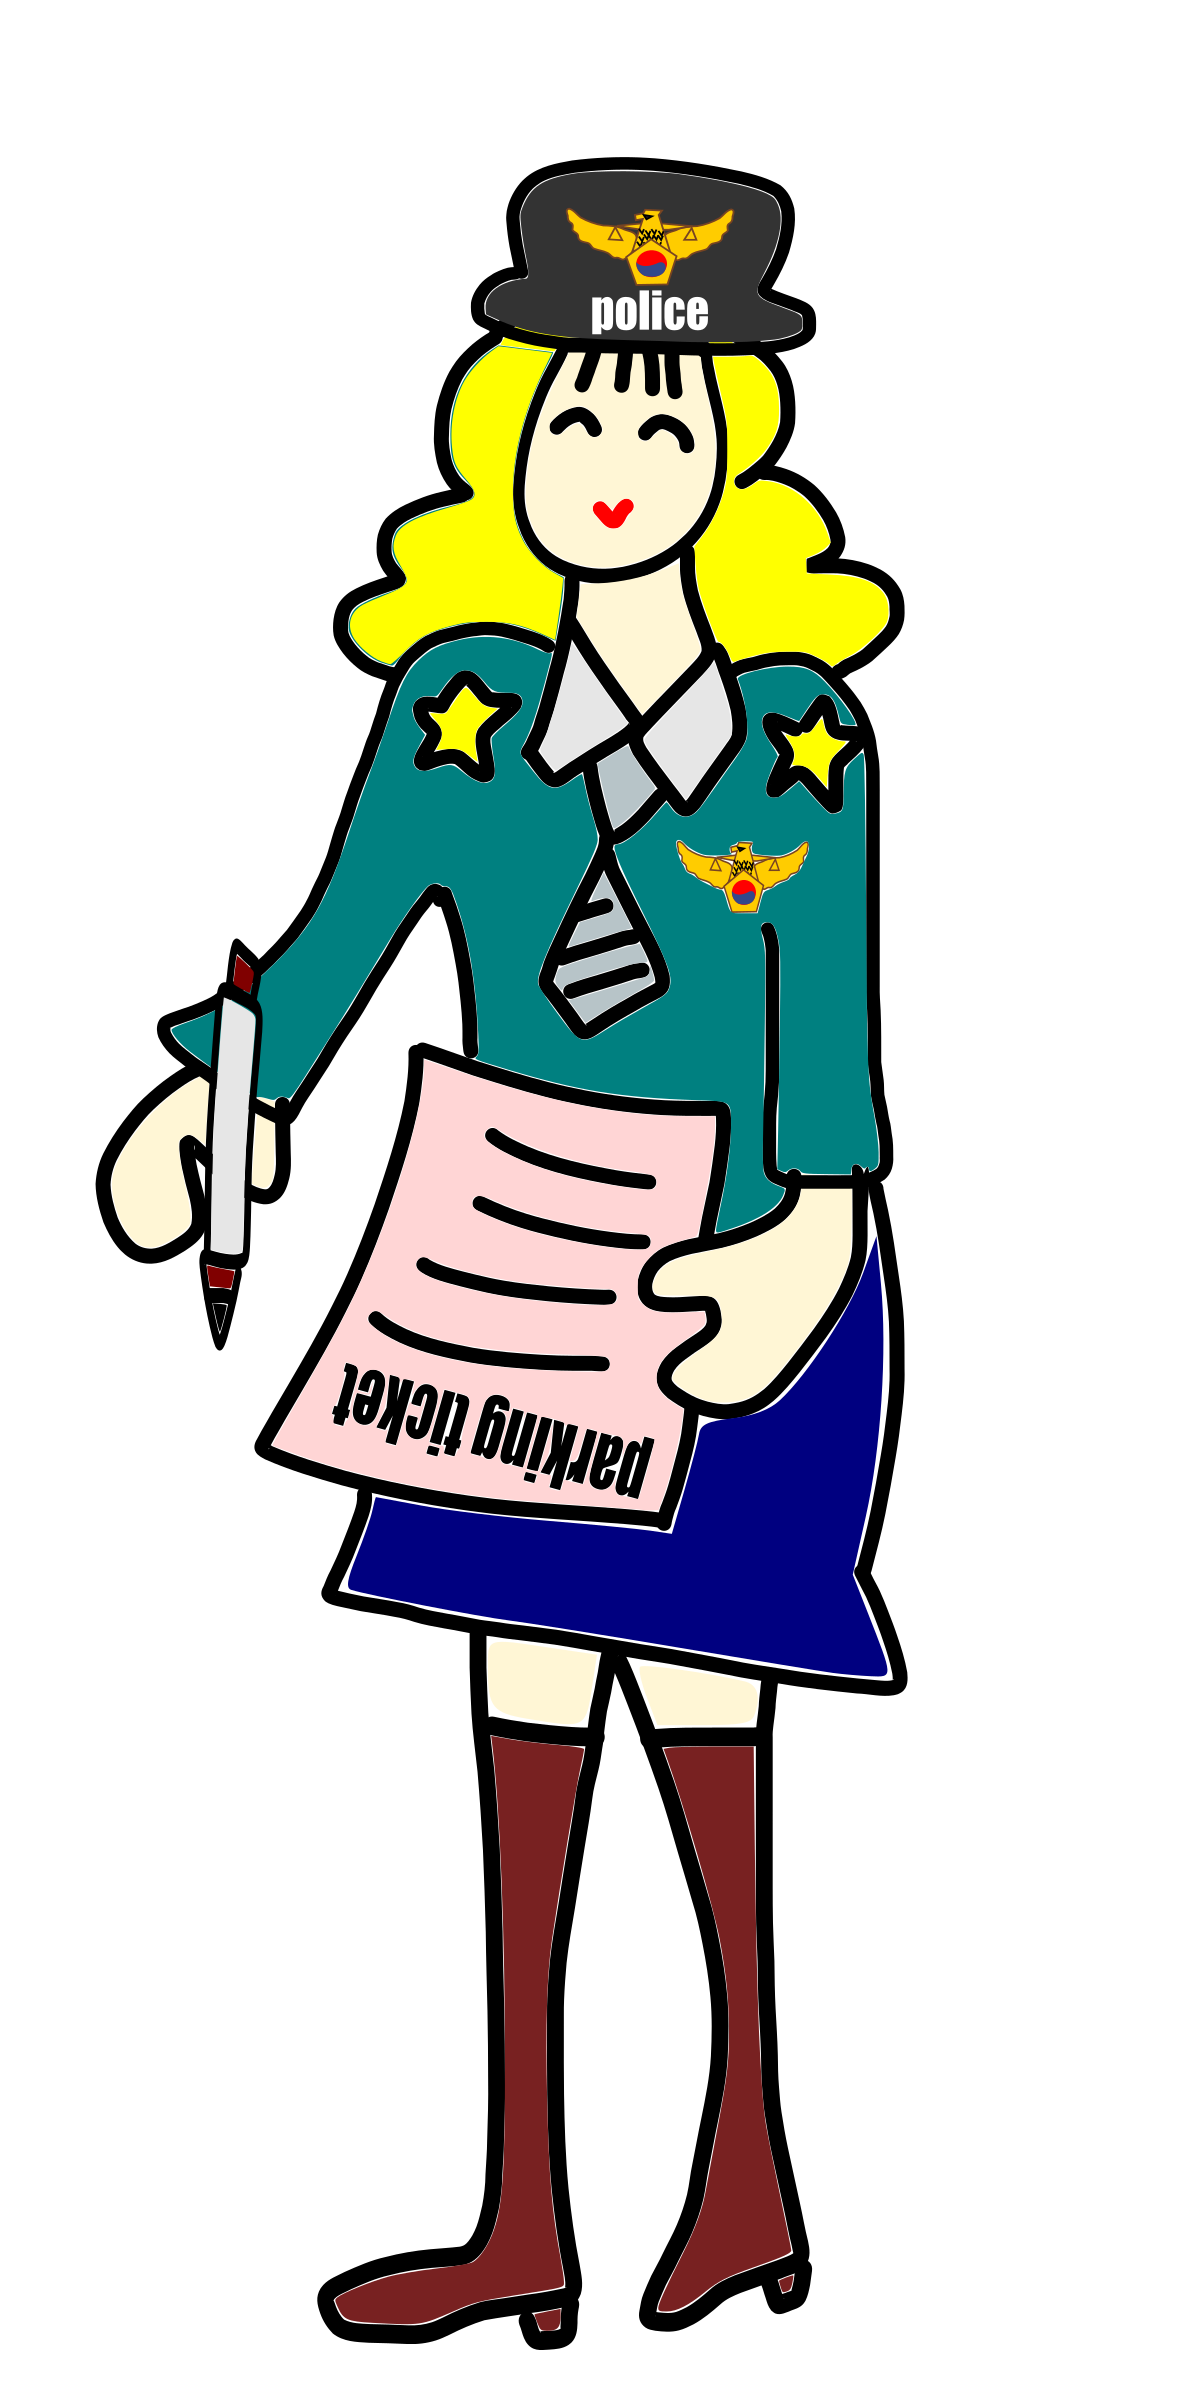 Policeman clipart police suit. Officer woman with a